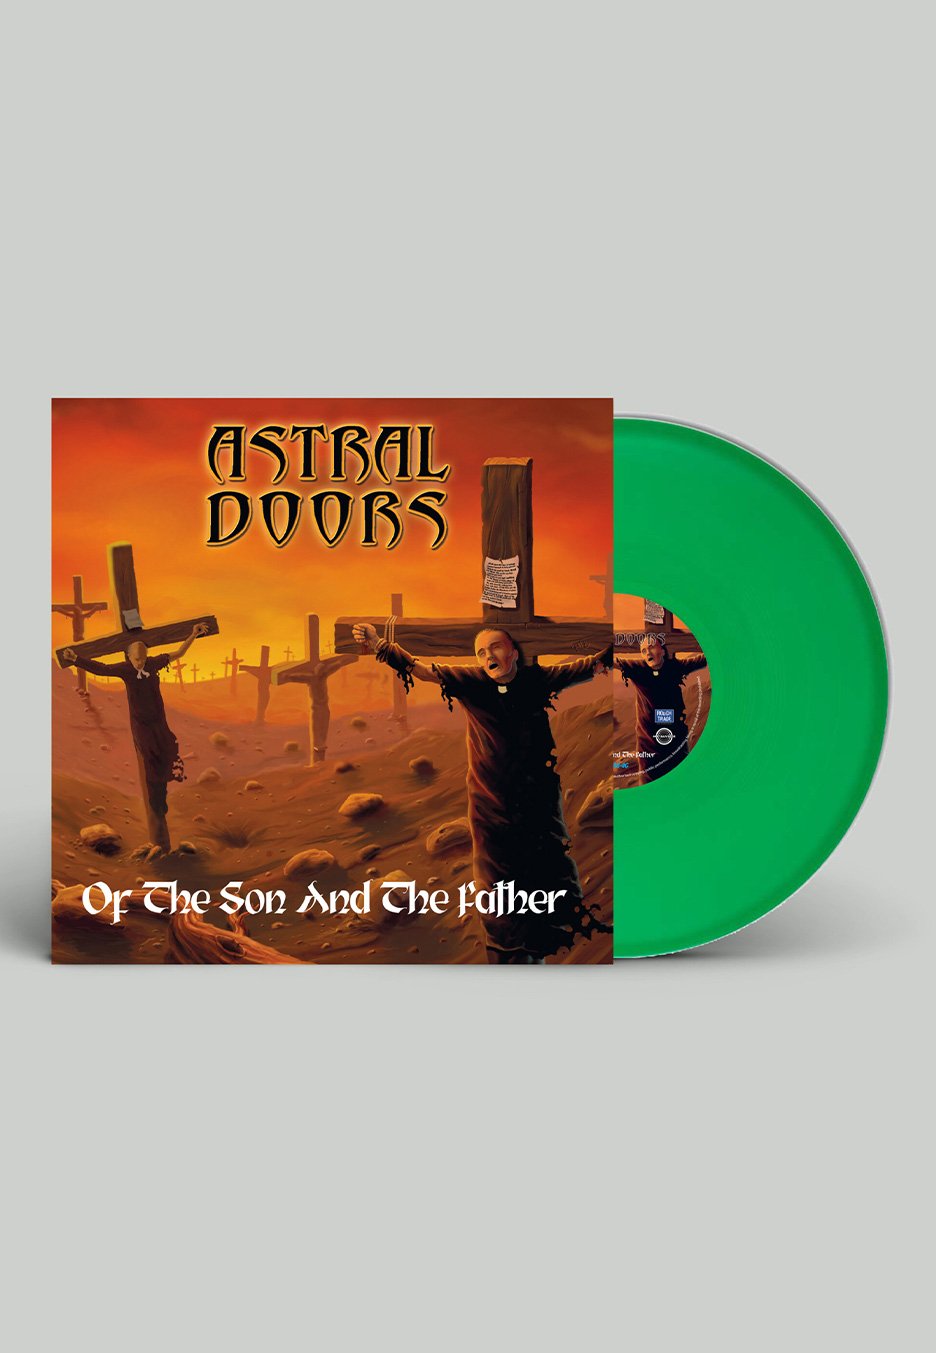 Astral Doors - Of The Son And The Father Ltd. Transparent Green - Colored Vinyl